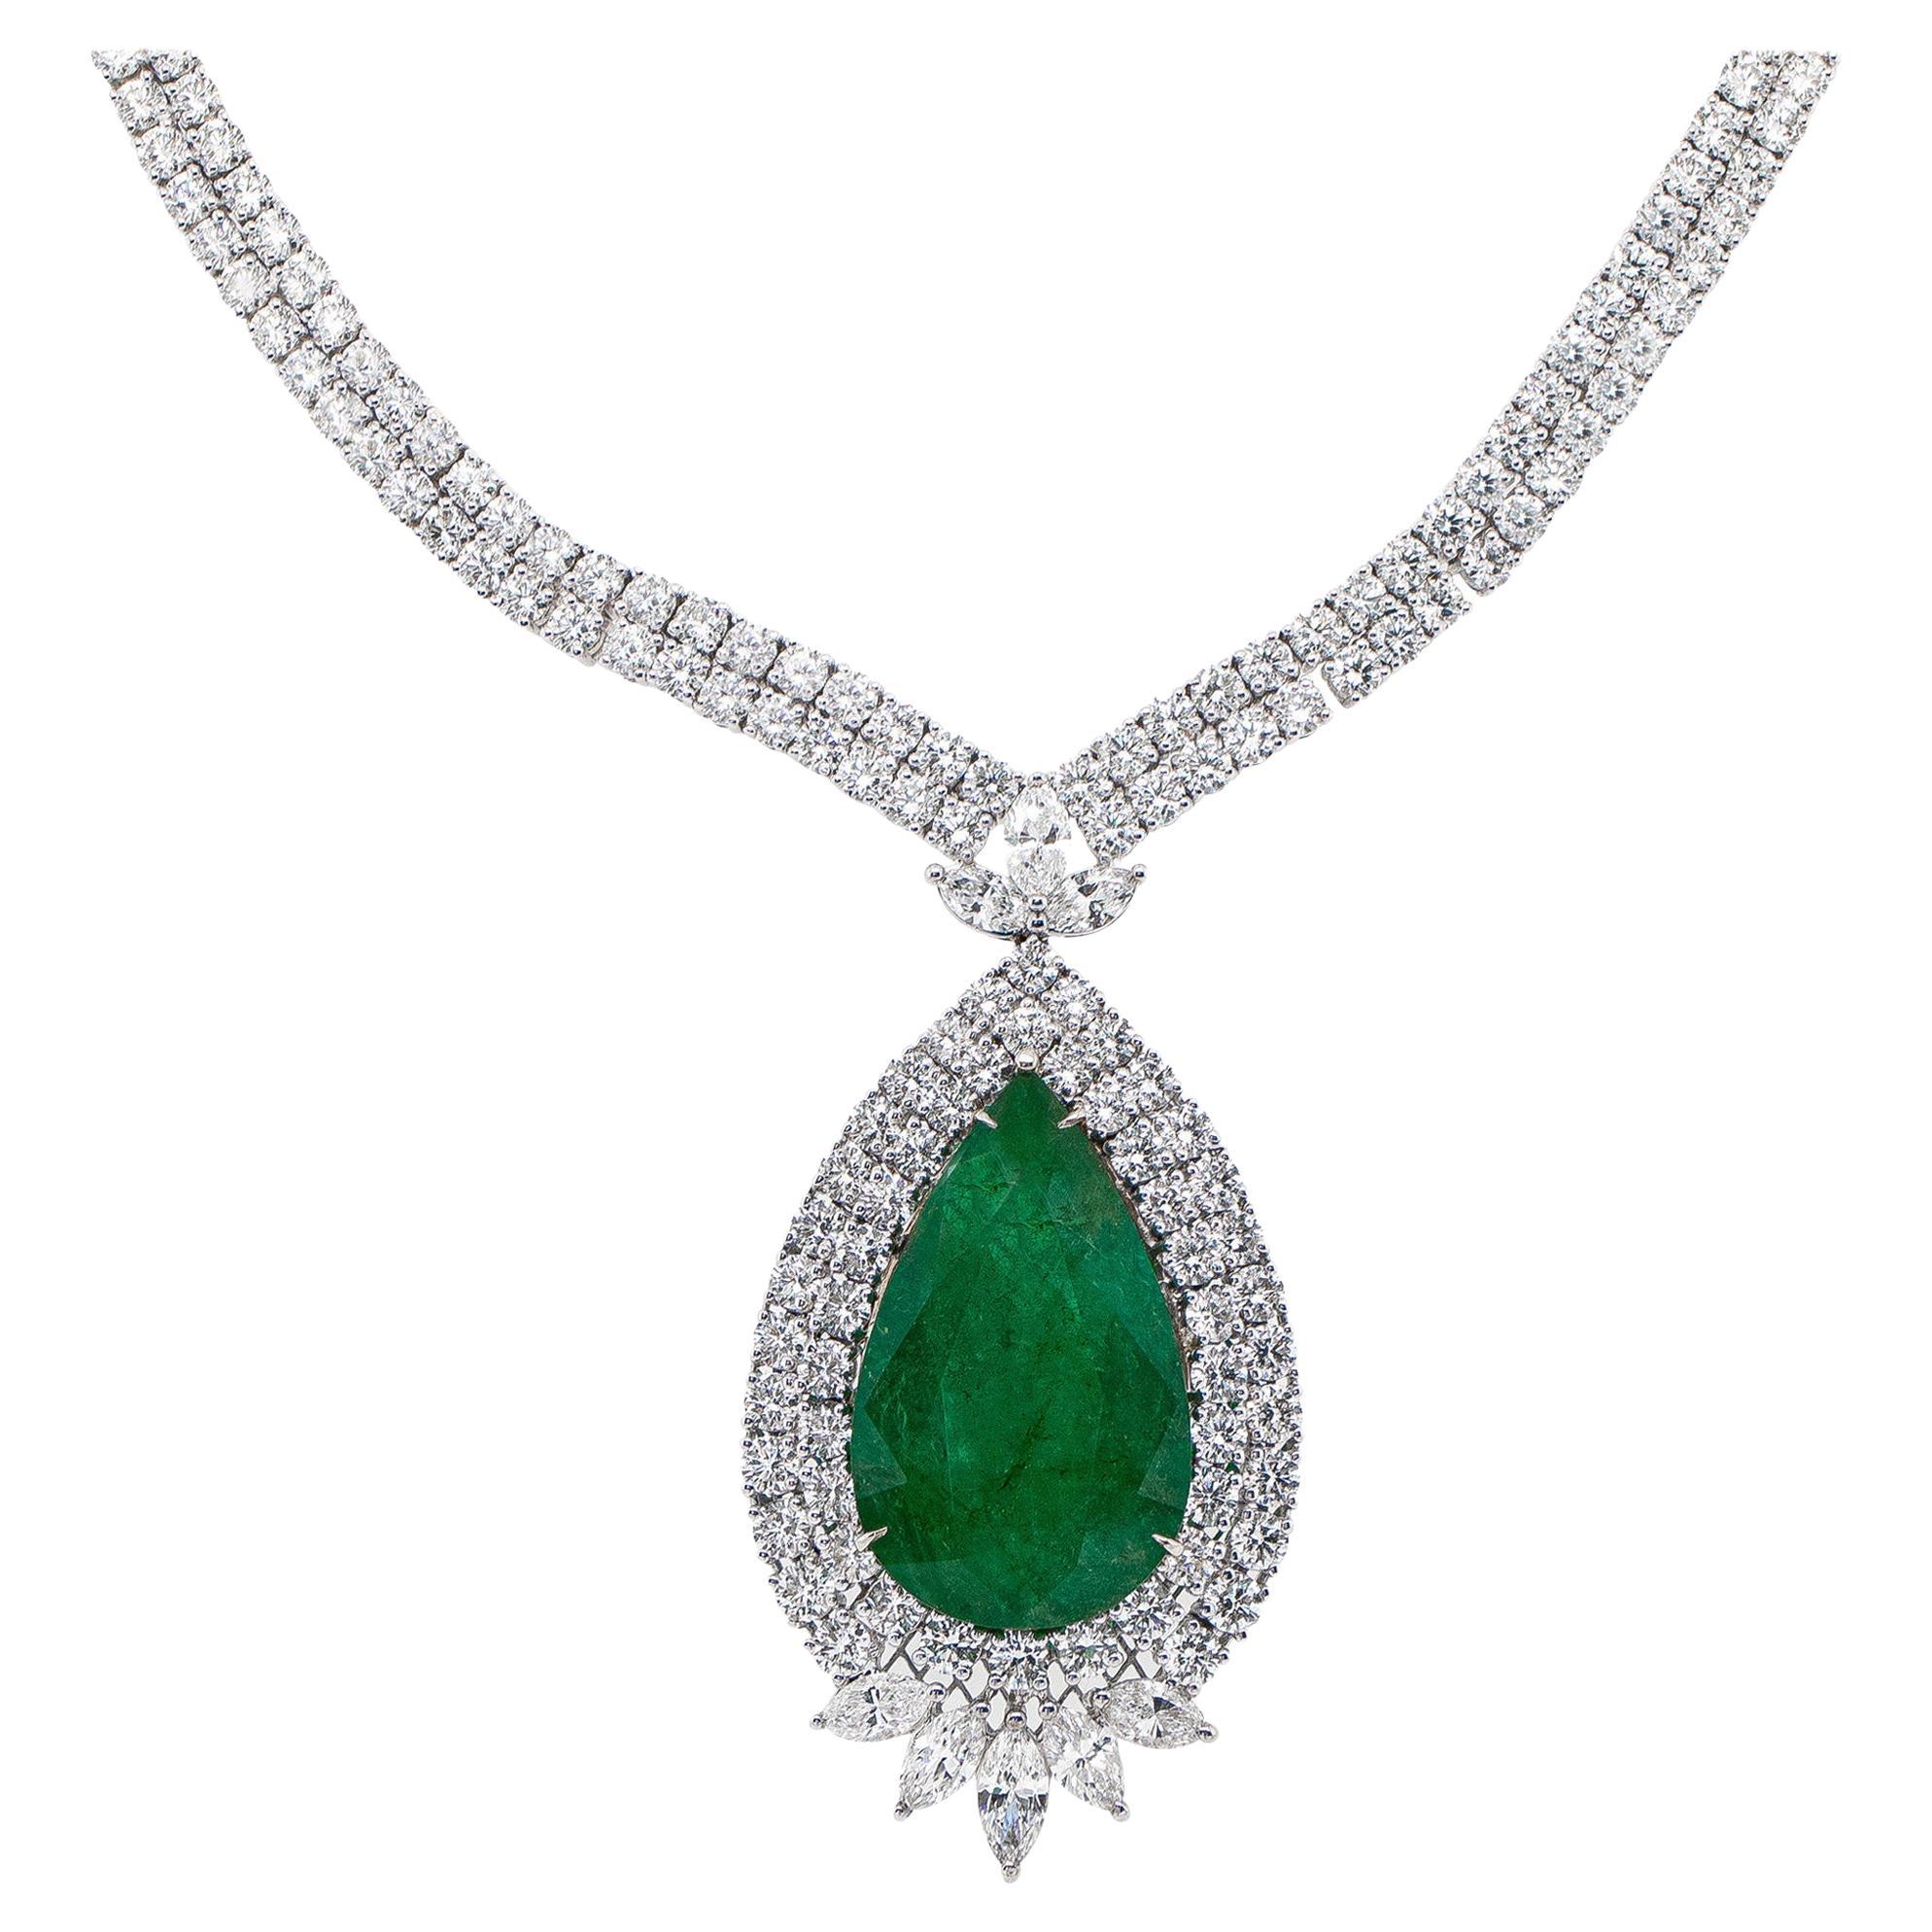 Important 27.15 Carat Pear Emerald Necklace Set with Diamonds 24.87 Carats Total For Sale